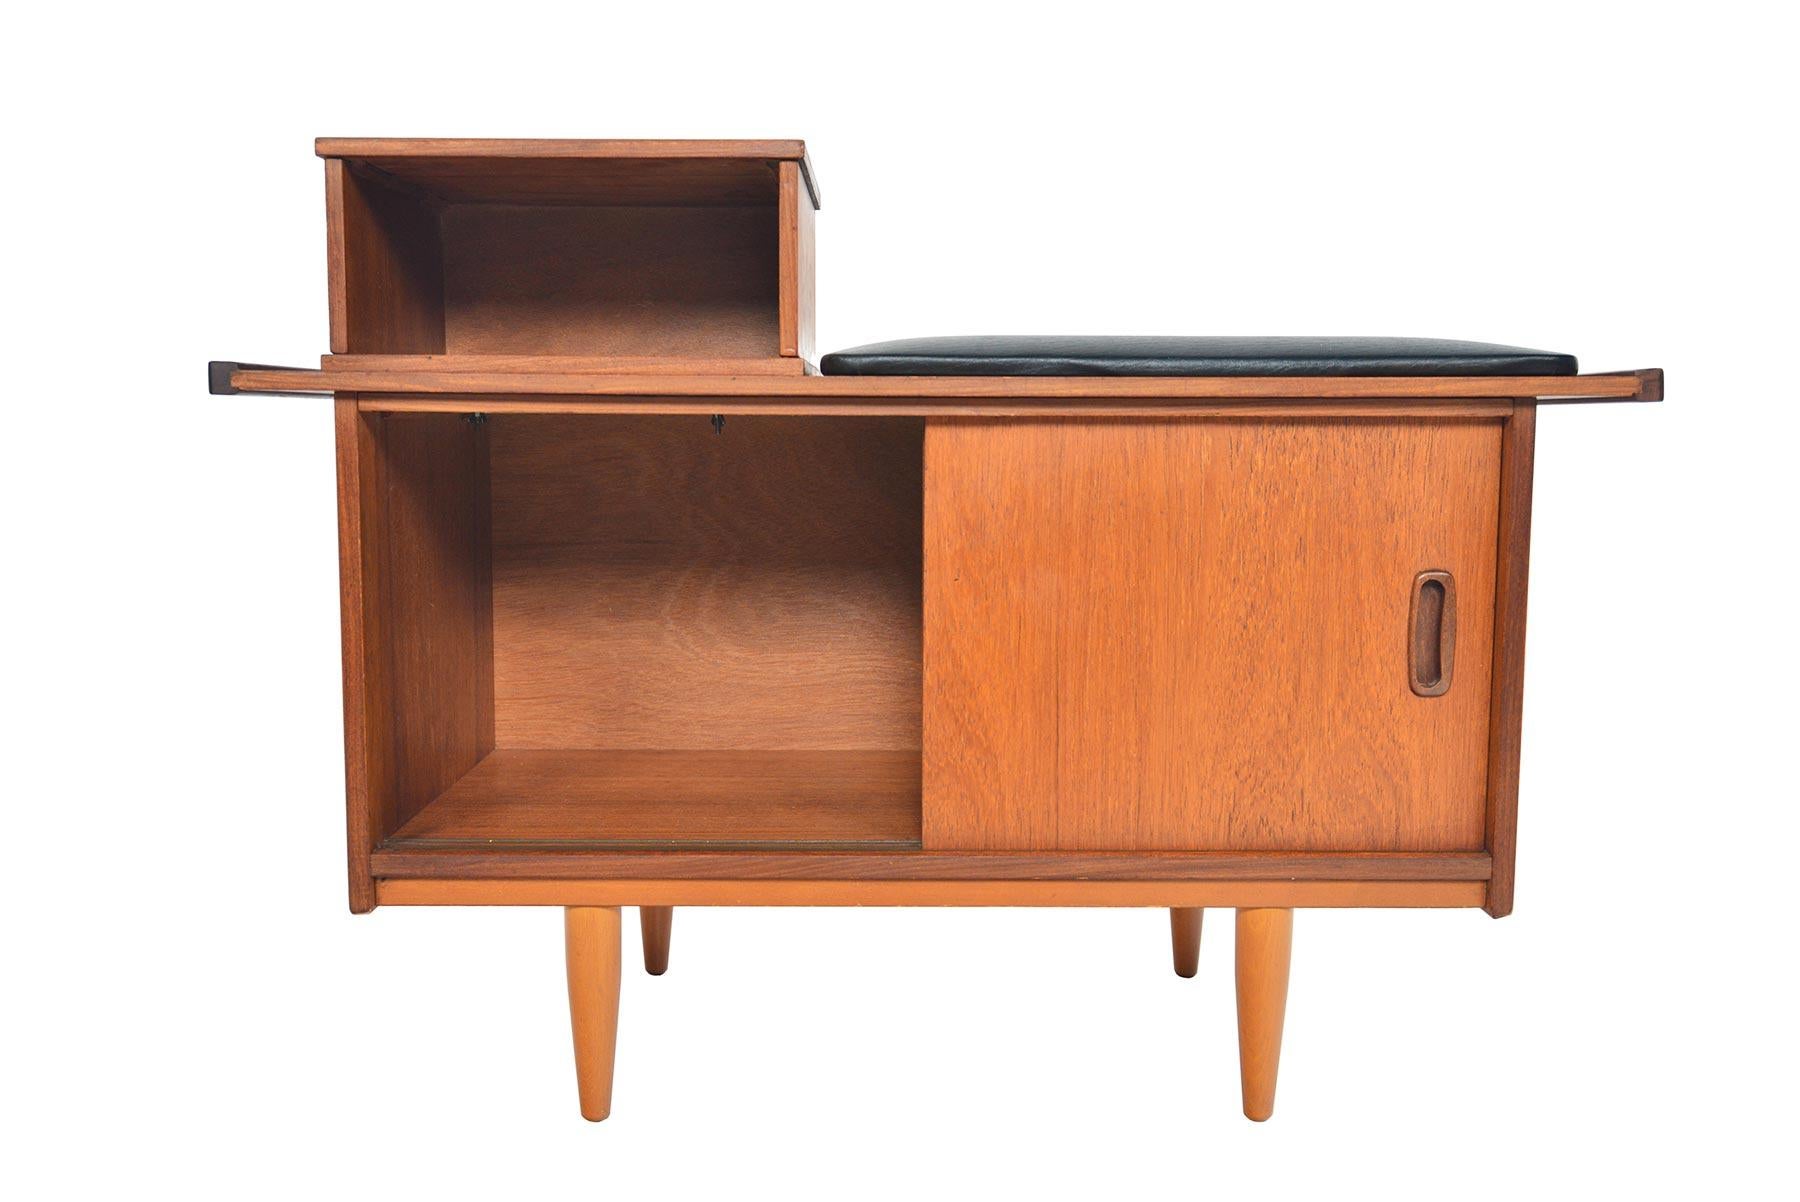 This English Mid-Century Modern telephone bench by Jentique is crafted in teak to provide a compact design for seating and storage. Perfect for any entryway, this time capsule design offers a vinyl covered cushions. A wonderful storage piece, this